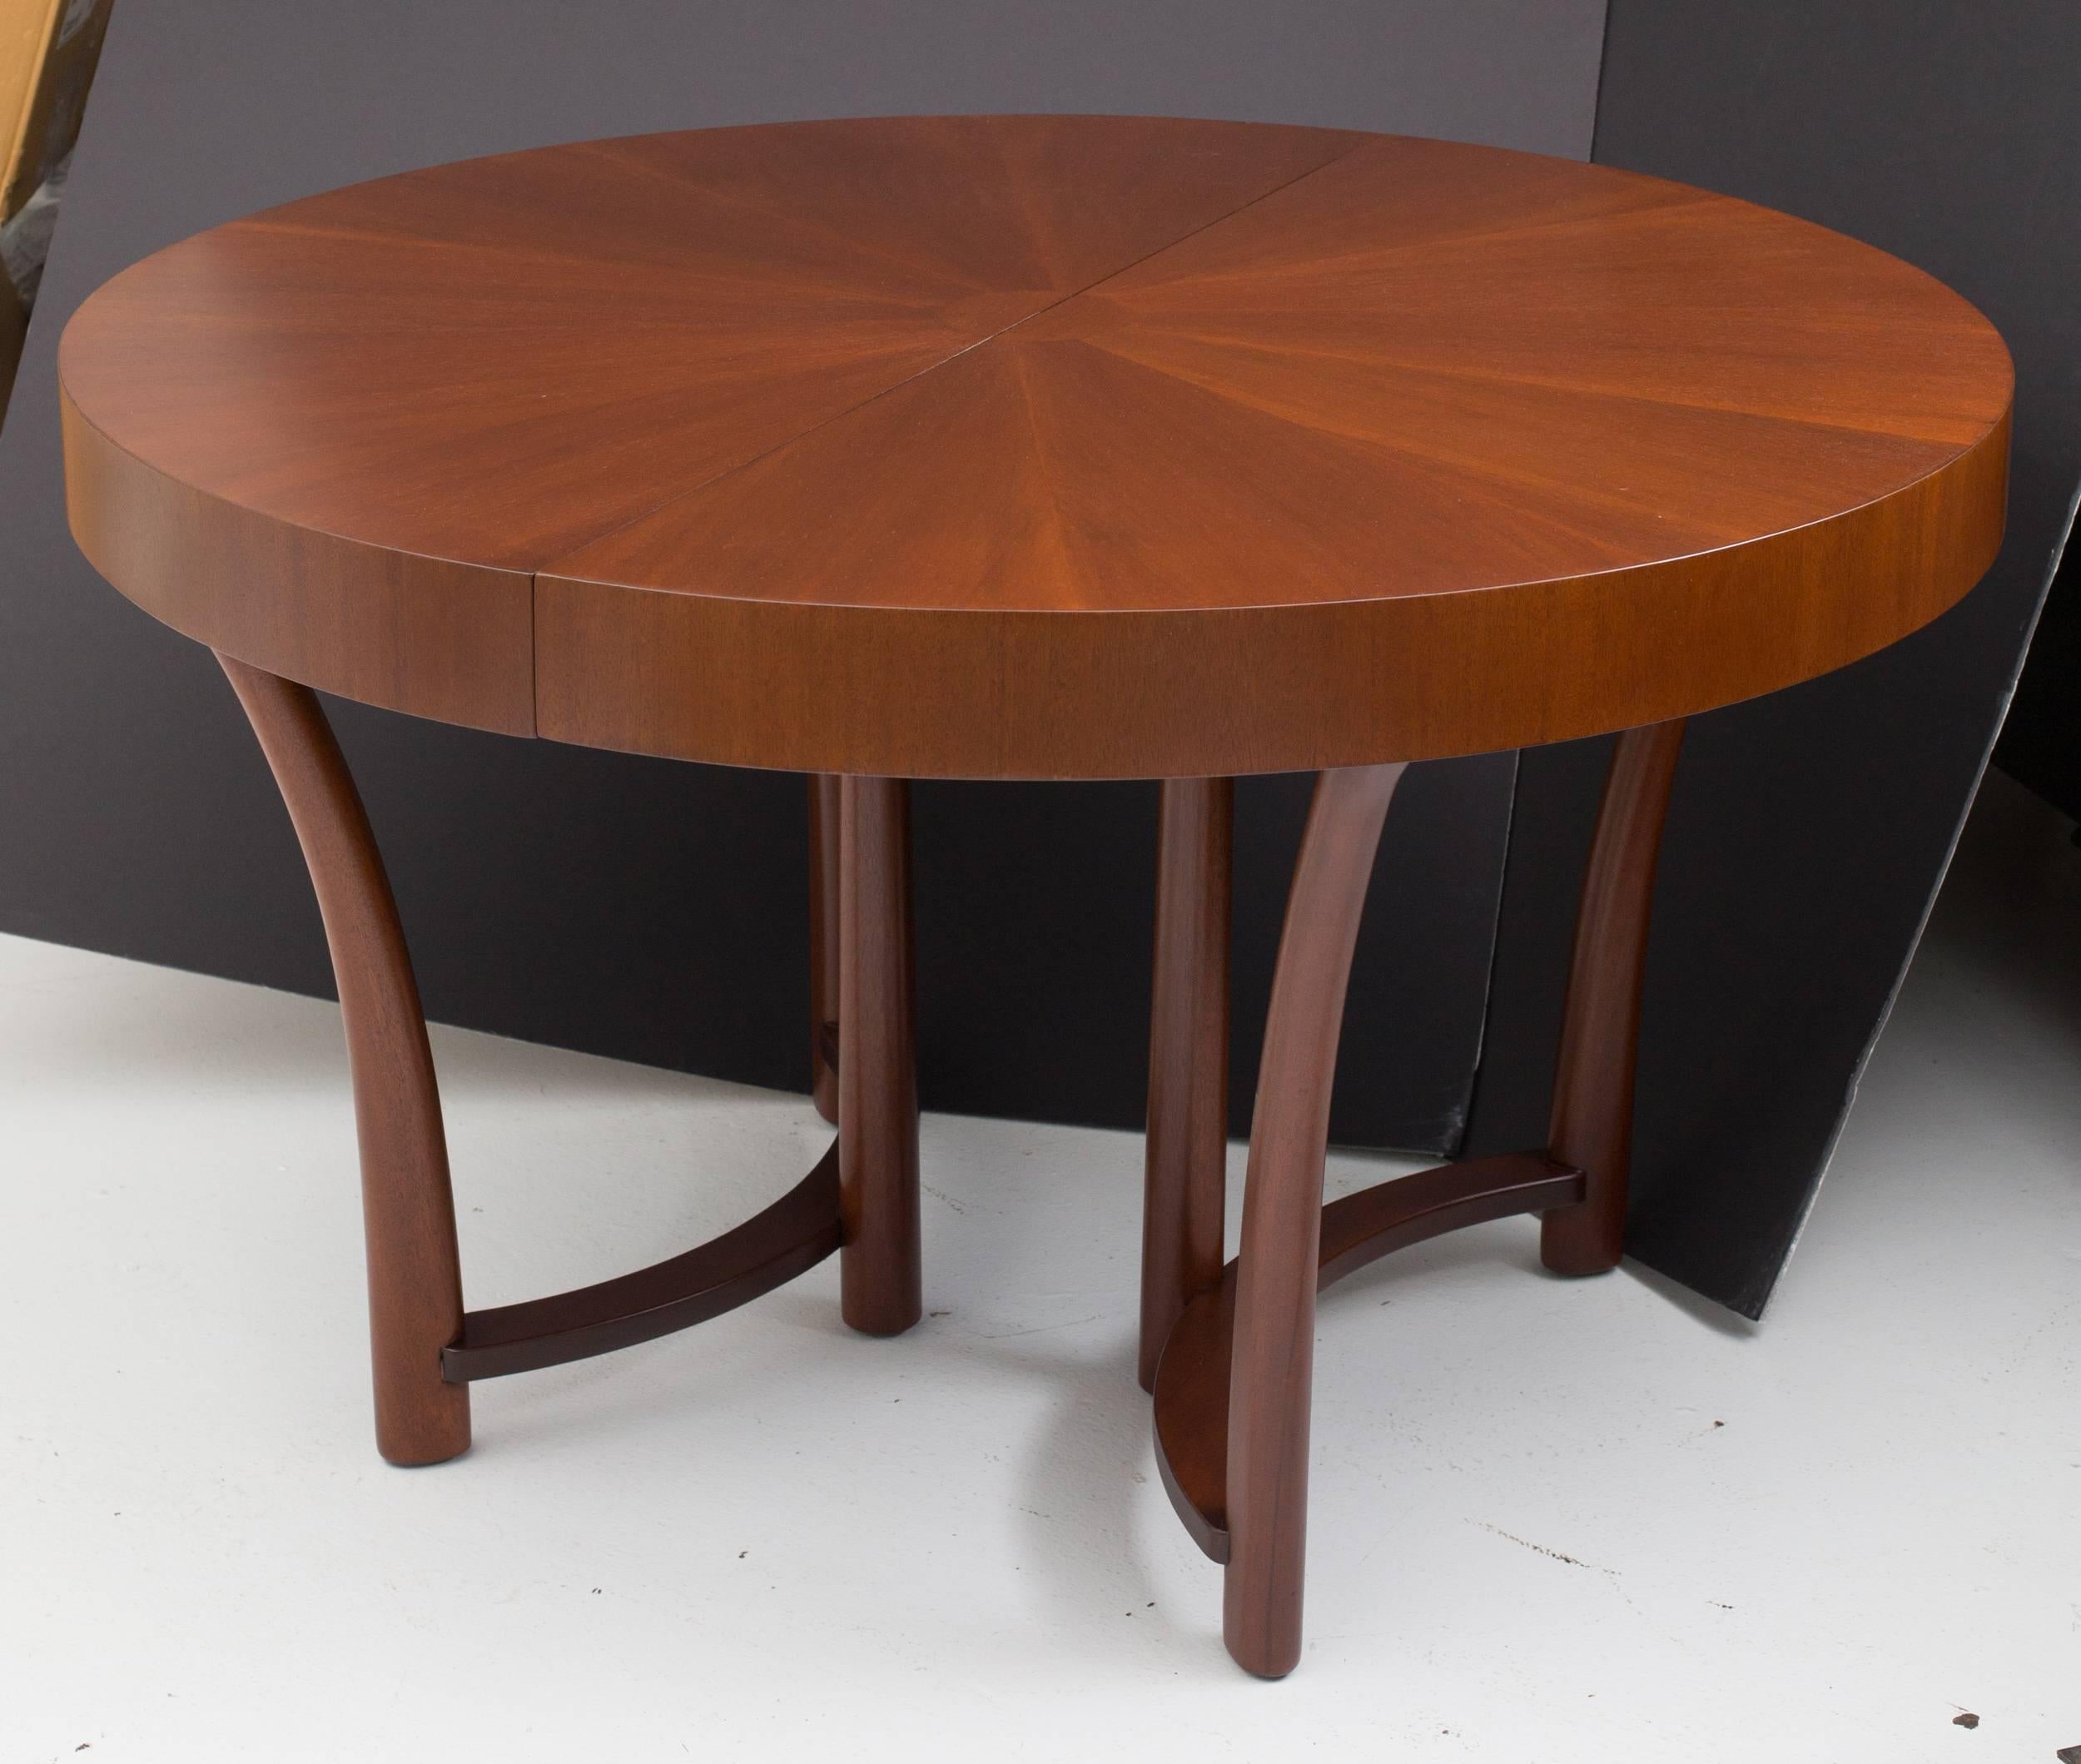 Round dining room table by T.H.Robsjohn-Gibbings 
for Widdicomb Furniture Co.,
with starburst veneer pattern top,
solid mahogany curved base and legs.
Three 12" W matching boards extend the top 
to 90" long oval shape.
